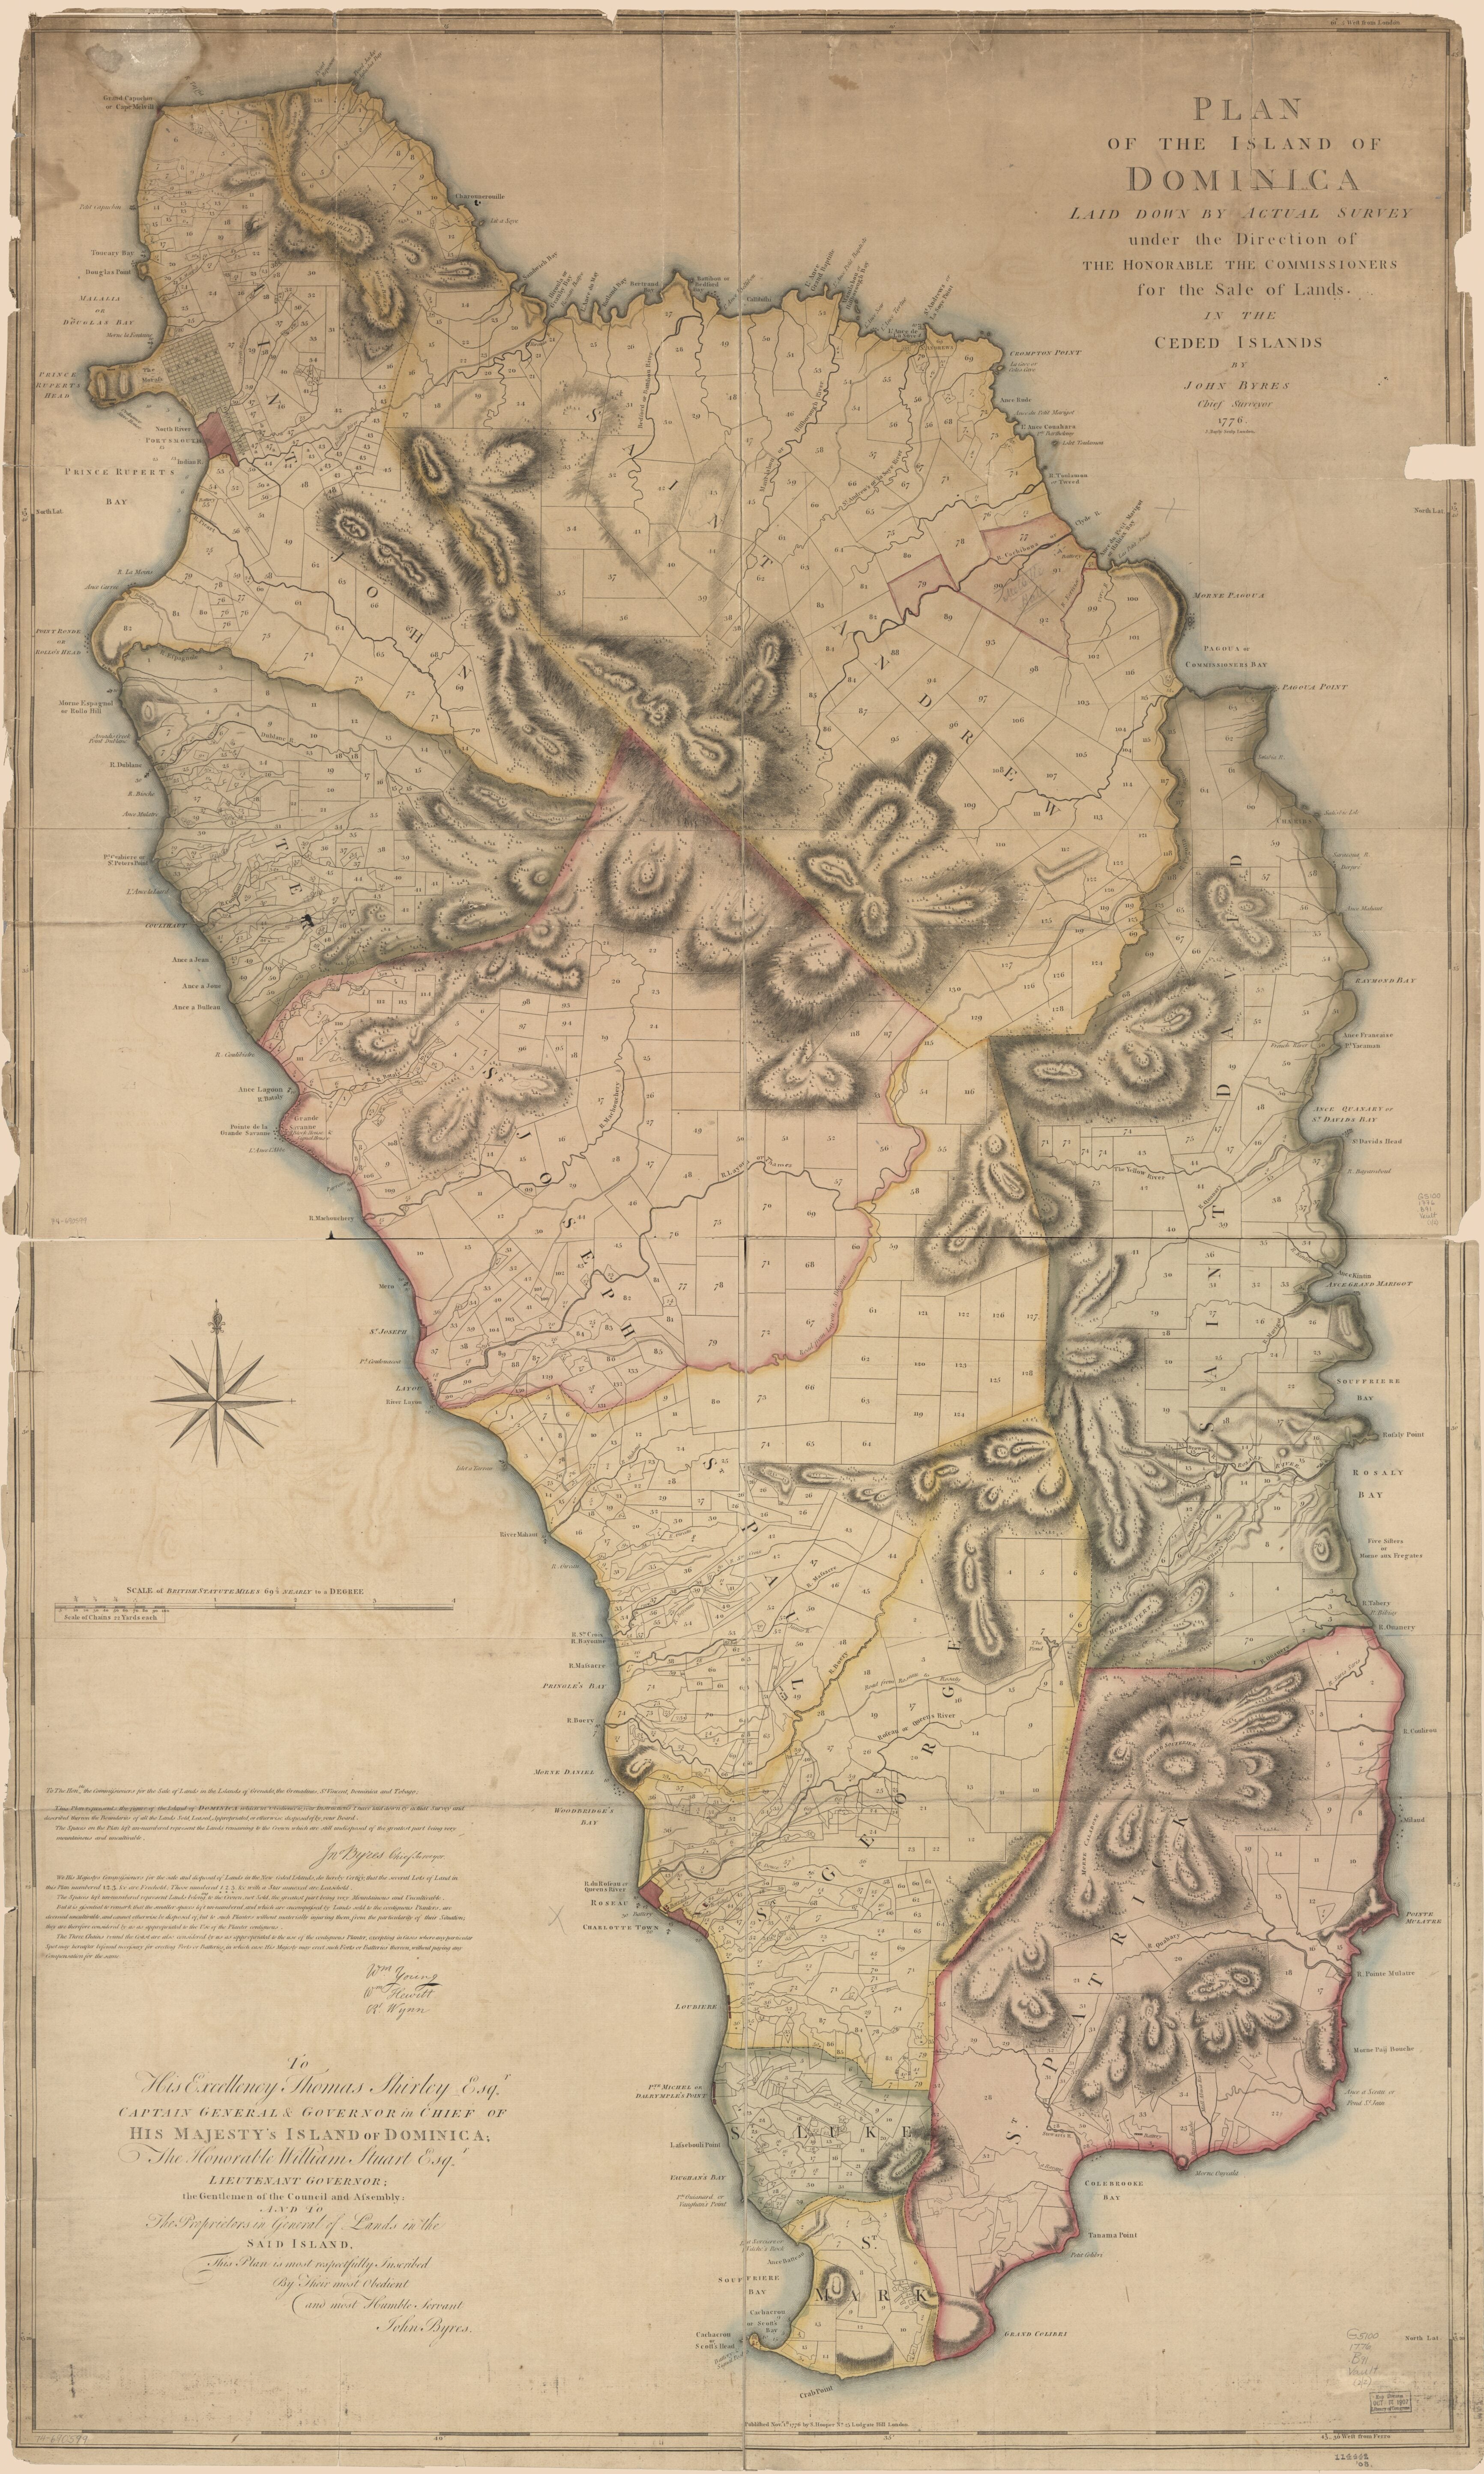 This old map of Plan of the Island of Dominica Laid Down by Actual Survey Under the Direction of the Honorable the Commissioners for the Sale of Lands In the Ceded Islands from 1776 was created by J. Bayly, John Byres, S. (Samuel) Hooper in 1776